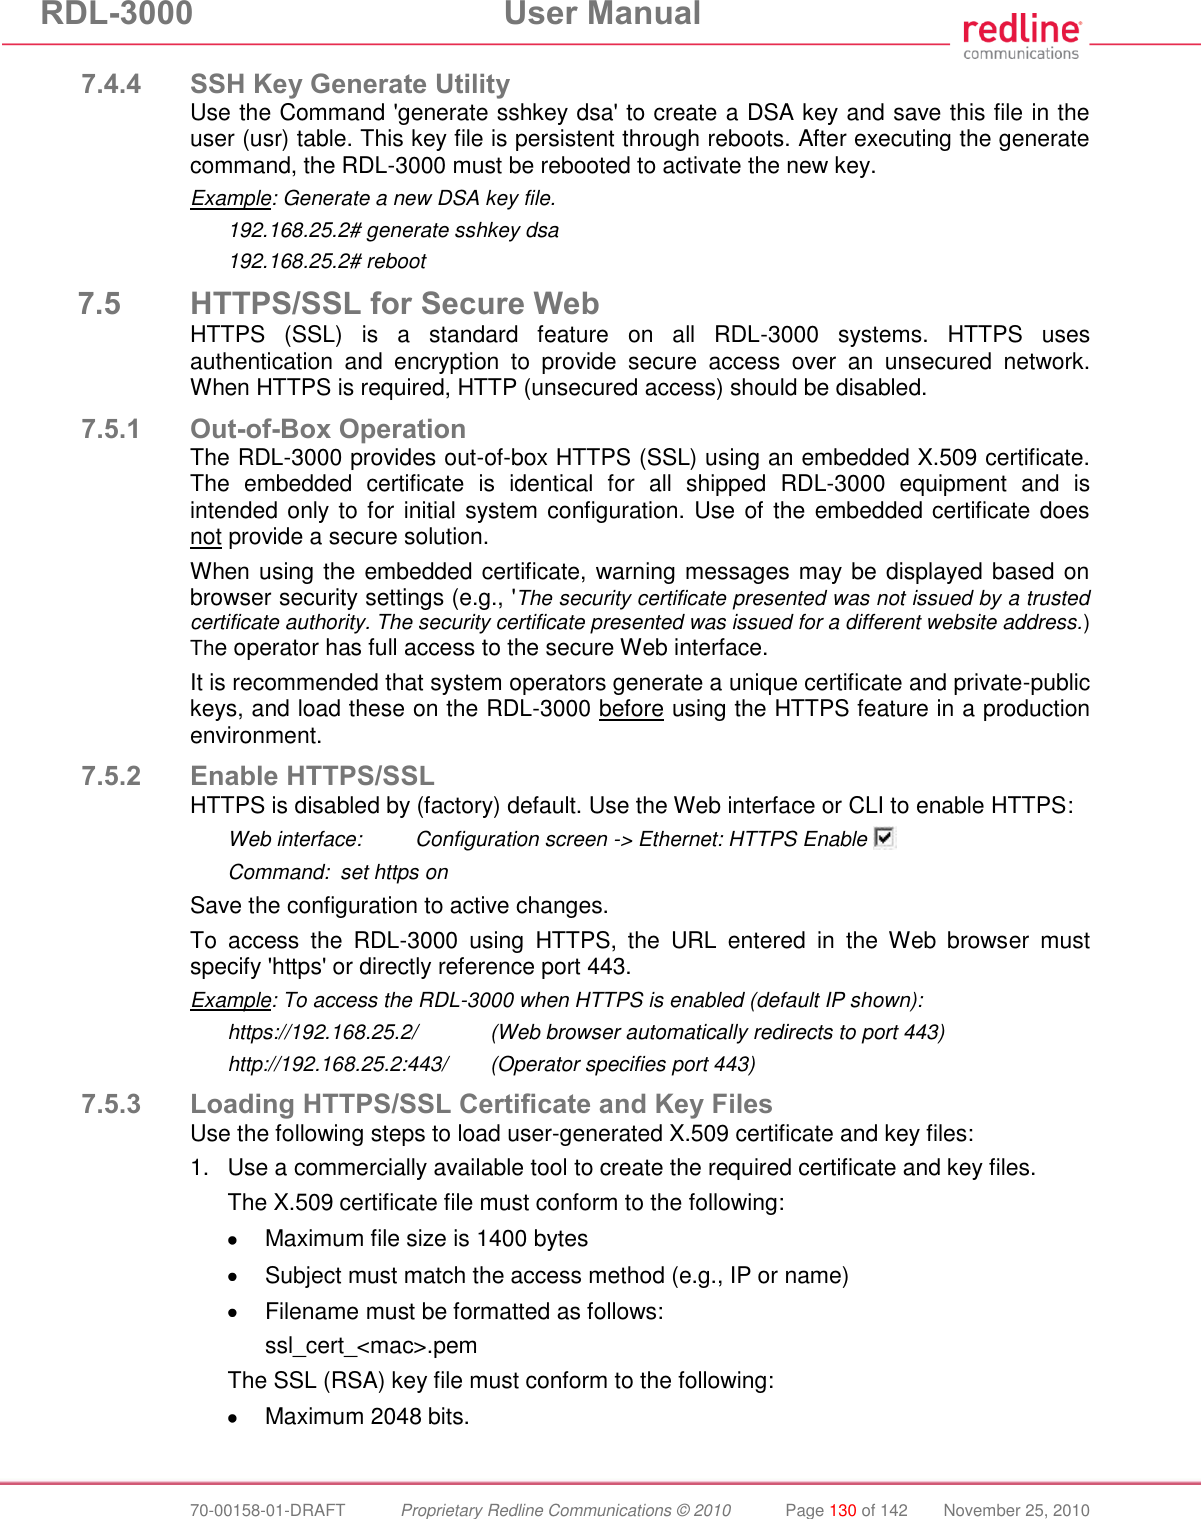 RDL-3000  User Manual  70-00158-01-DRAFT  Proprietary Redline Communications © 2010  Page 130 of 142  November 25, 2010 7.4.4 SSH Key Generate Utility Use the Command &apos;generate sshkey dsa&apos; to create a DSA key and save this file in the user (usr) table. This key file is persistent through reboots. After executing the generate command, the RDL-3000 must be rebooted to activate the new key. Example: Generate a new DSA key file. 192.168.25.2# generate sshkey dsa 192.168.25.2# reboot 7.5 HTTPS/SSL for Secure Web HTTPS  (SSL)  is  a  standard  feature  on  all  RDL-3000  systems.  HTTPS  uses authentication  and  encryption  to  provide  secure  access  over  an  unsecured  network. When HTTPS is required, HTTP (unsecured access) should be disabled. 7.5.1 Out-of-Box Operation The RDL-3000 provides out-of-box HTTPS (SSL) using an embedded X.509 certificate. The  embedded  certificate  is  identical  for  all  shipped  RDL-3000  equipment  and  is intended only to for initial system configuration. Use of the embedded certificate does not provide a secure solution. When using the embedded certificate, warning messages may be displayed based on browser security settings (e.g., &apos;The security certificate presented was not issued by a trusted certificate authority. The security certificate presented was issued for a different website address.) The operator has full access to the secure Web interface. It is recommended that system operators generate a unique certificate and private-public keys, and load these on the RDL-3000 before using the HTTPS feature in a production environment. 7.5.2 Enable HTTPS/SSL HTTPS is disabled by (factory) default. Use the Web interface or CLI to enable HTTPS: Web interface:  Configuration screen -&gt; Ethernet: HTTPS Enable   Command:  set https on Save the configuration to active changes. To  access  the  RDL-3000  using  HTTPS,  the  URL  entered  in  the  Web  browser  must specify &apos;https&apos; or directly reference port 443. Example: To access the RDL-3000 when HTTPS is enabled (default IP shown): https://192.168.25.2/  (Web browser automatically redirects to port 443) http://192.168.25.2:443/  (Operator specifies port 443) 7.5.3 Loading HTTPS/SSL Certificate and Key Files Use the following steps to load user-generated X.509 certificate and key files: 1.  Use a commercially available tool to create the required certificate and key files. The X.509 certificate file must conform to the following:   Maximum file size is 1400 bytes   Subject must match the access method (e.g., IP or name)   Filename must be formatted as follows: ssl_cert_&lt;mac&gt;.pem The SSL (RSA) key file must conform to the following:   Maximum 2048 bits.  